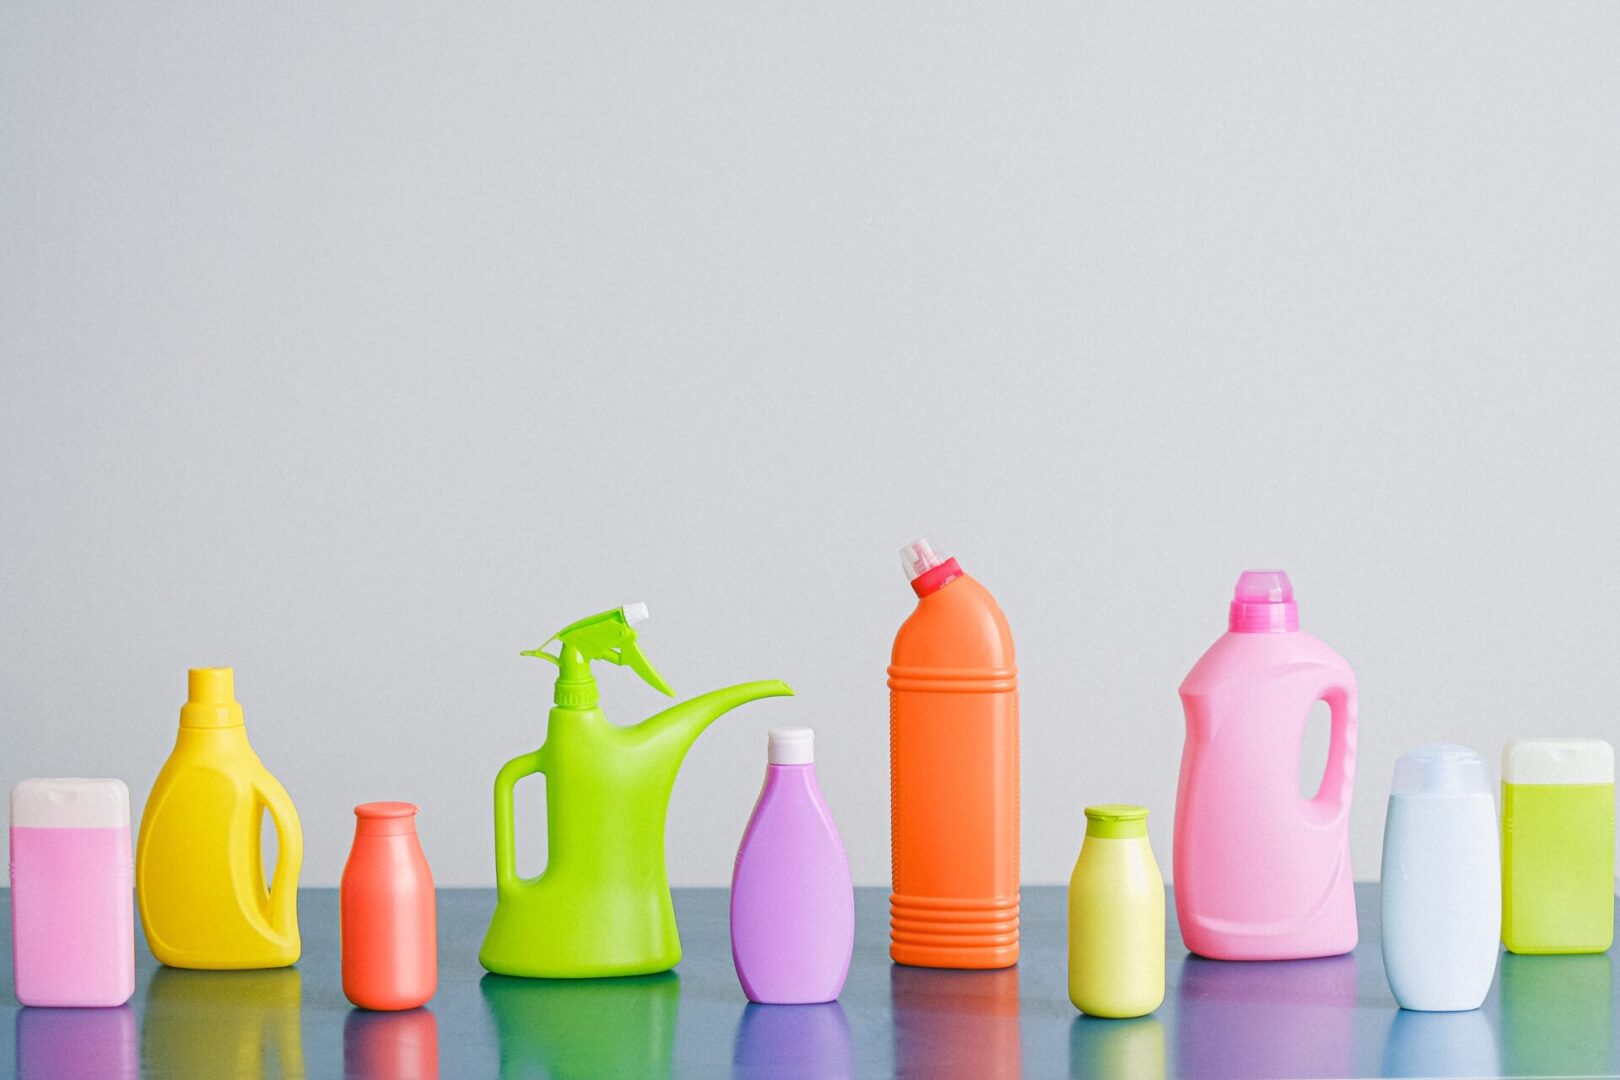 A group of different colored bottles and jugs on top of a table.